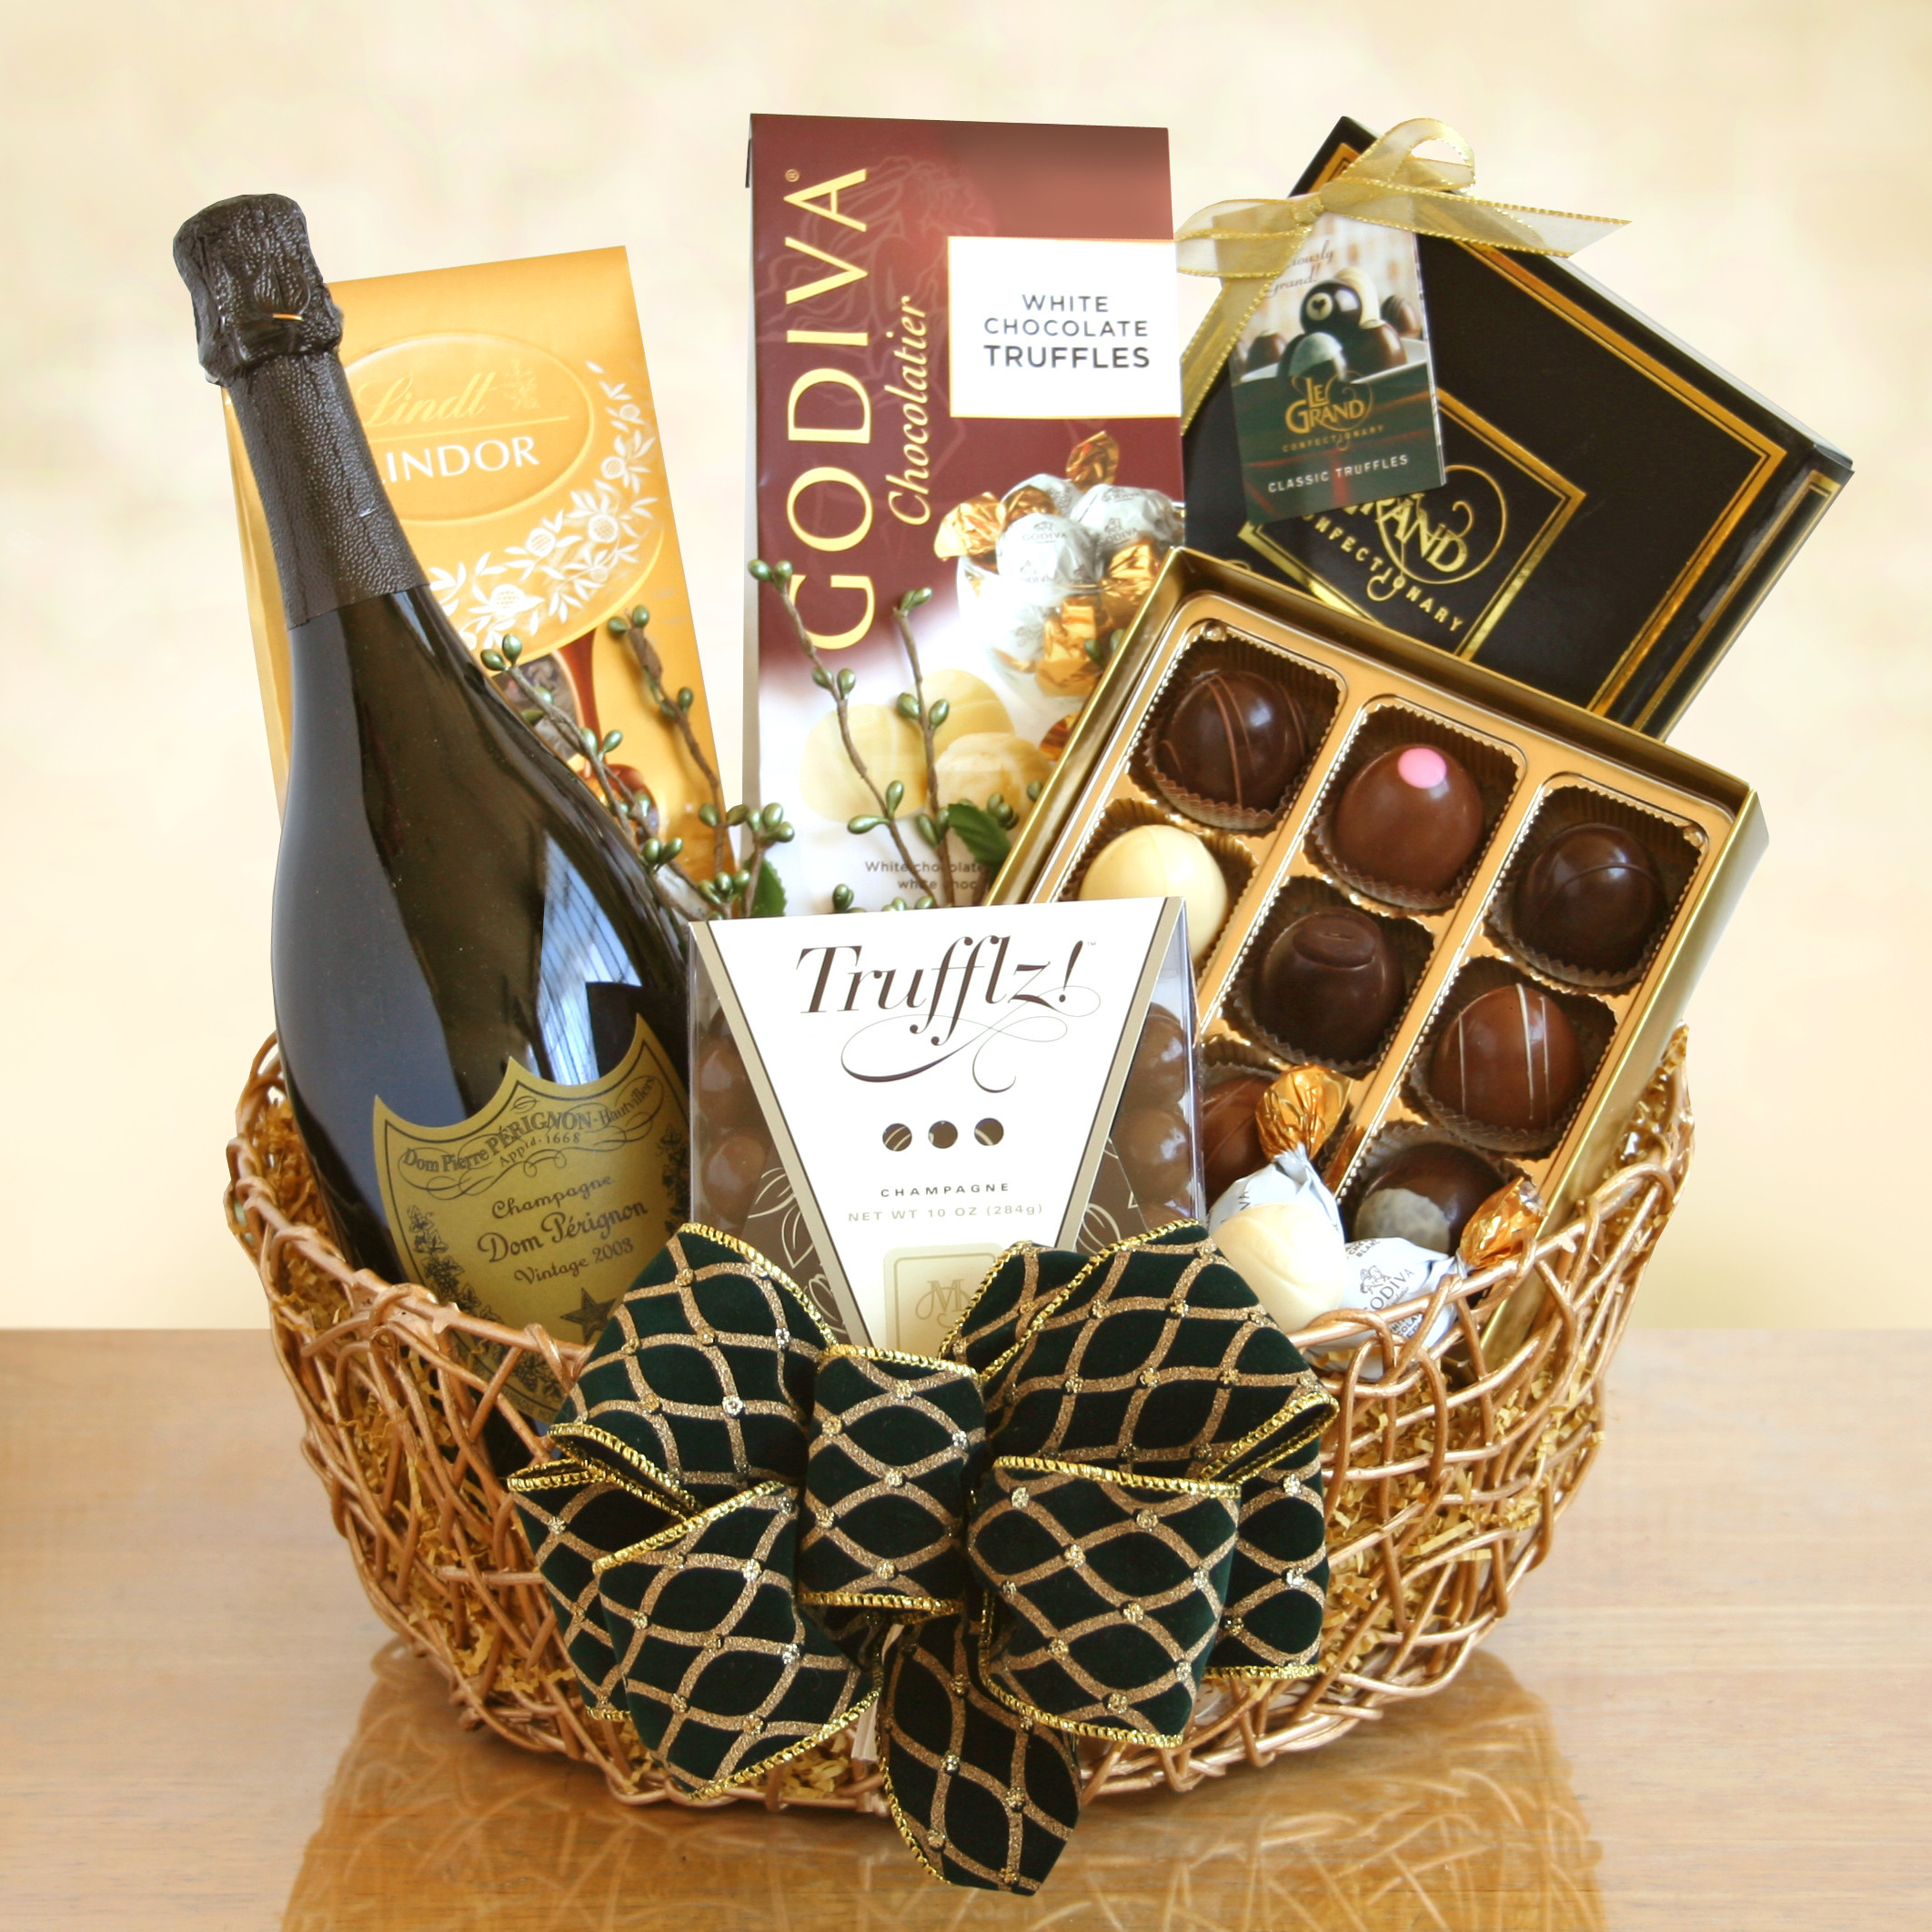 Champagne Gift Basket Ideas
 Ultimate Dom Perignon Champagne and Truffles Gift Basket